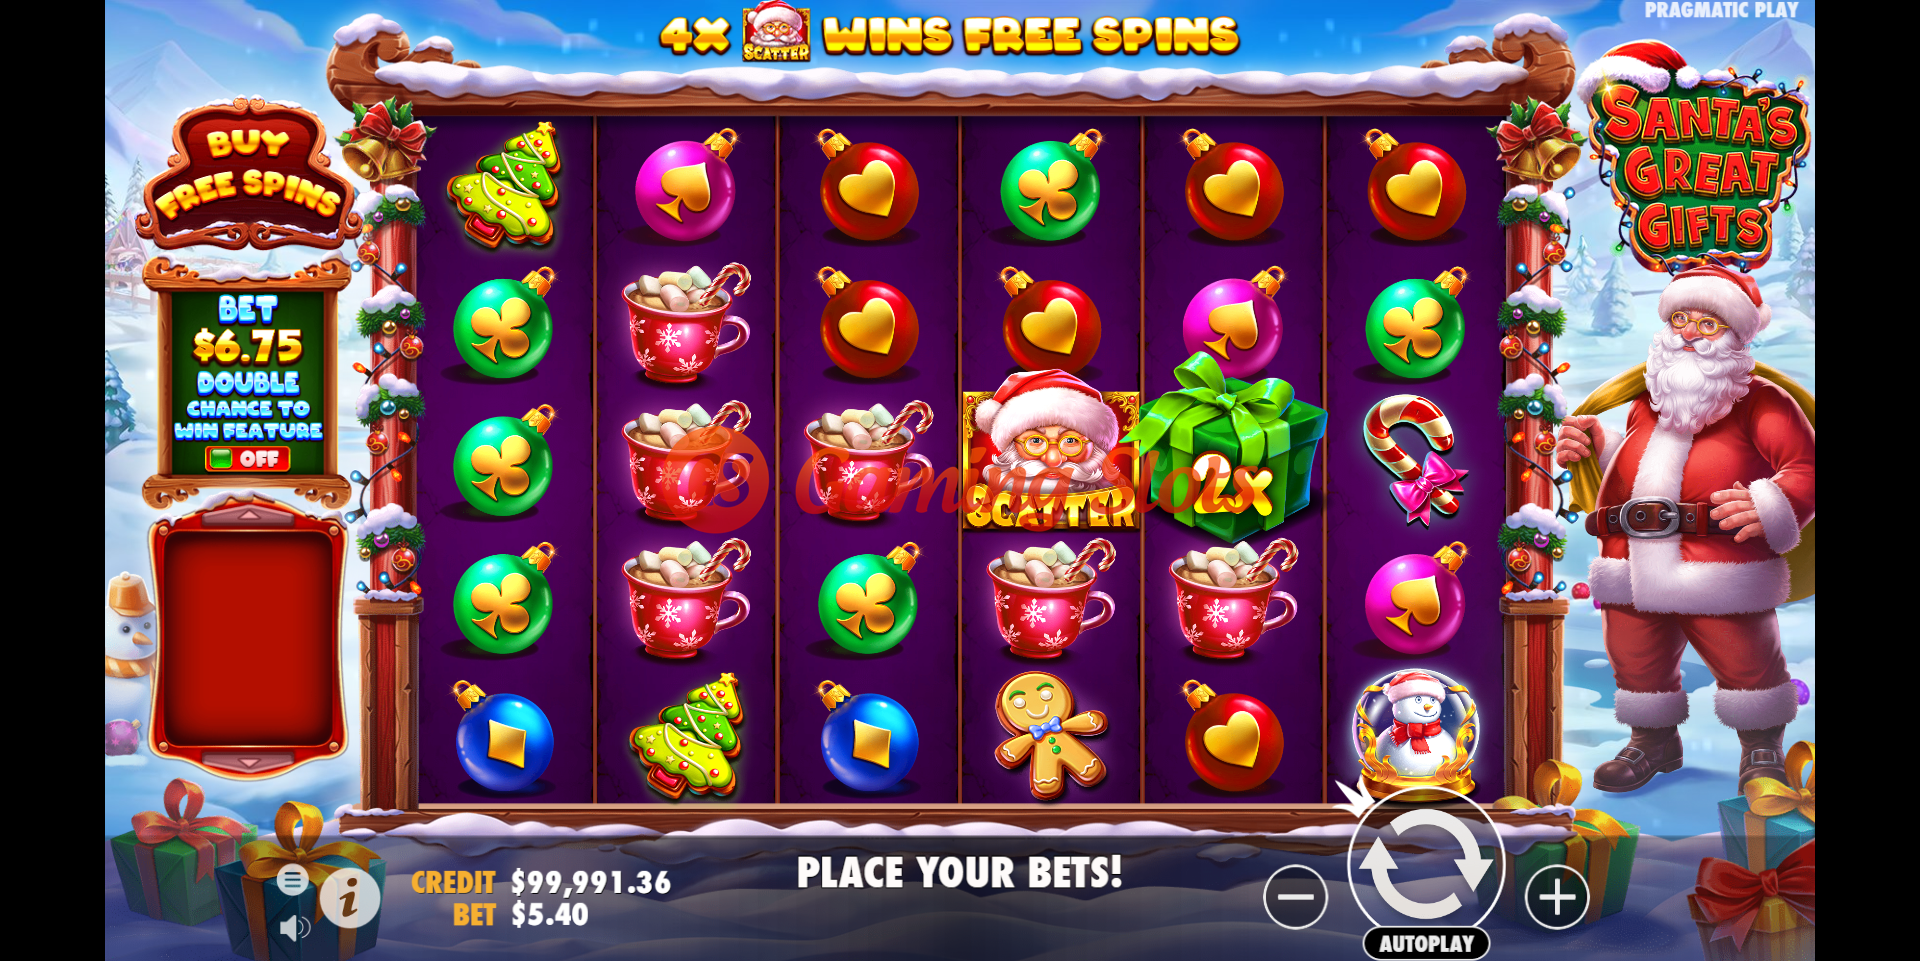 Base Game for Santa's Great Gifts slot from Pragmatic Play